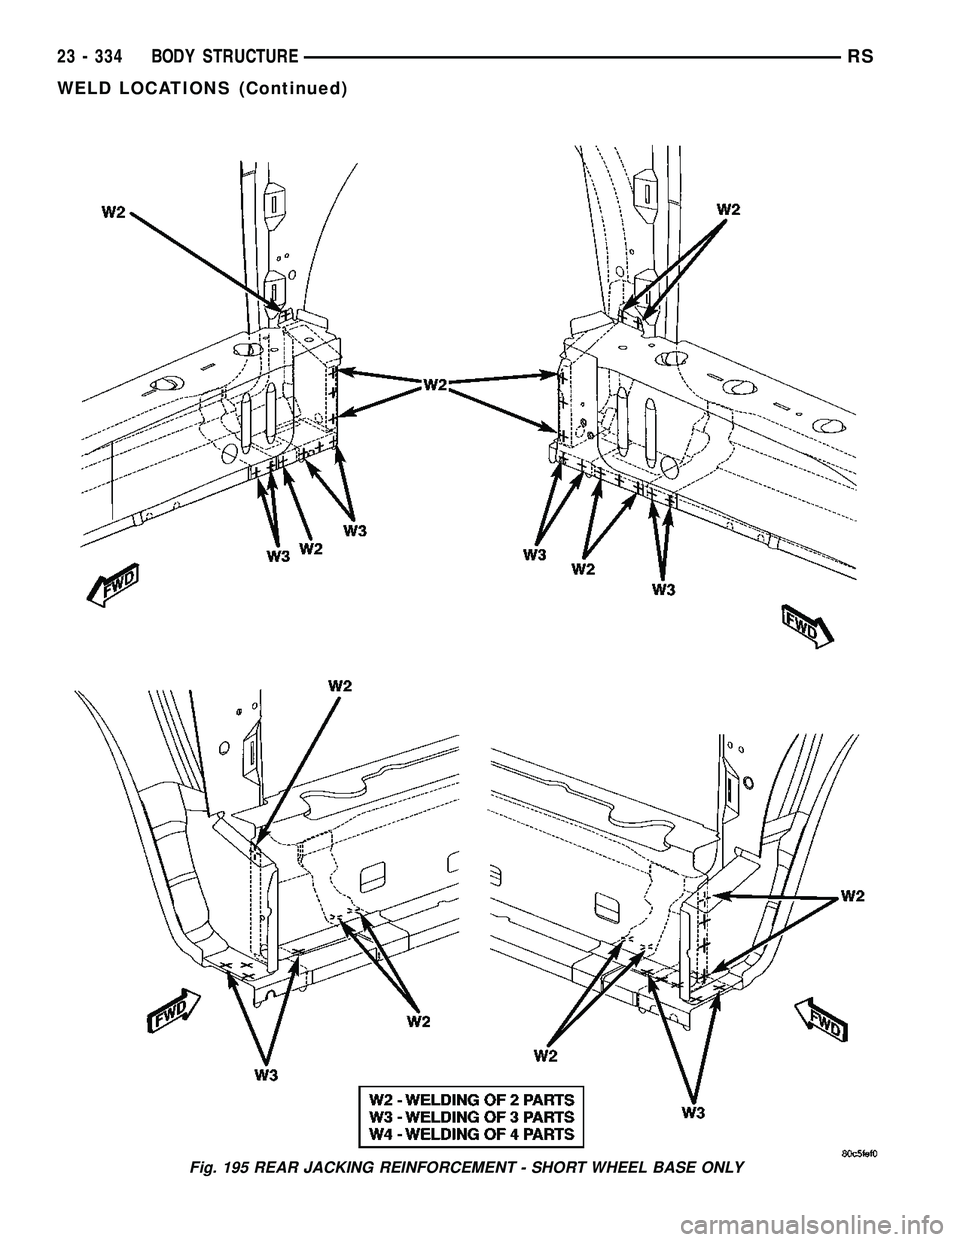 CHRYSLER CARAVAN 2005  Service Manual Fig. 195 REAR JACKING REINFORCEMENT - SHORT WHEEL BASE ONLY
23 - 334 BODY STRUCTURERS
WELD LOCATIONS (Continued) 